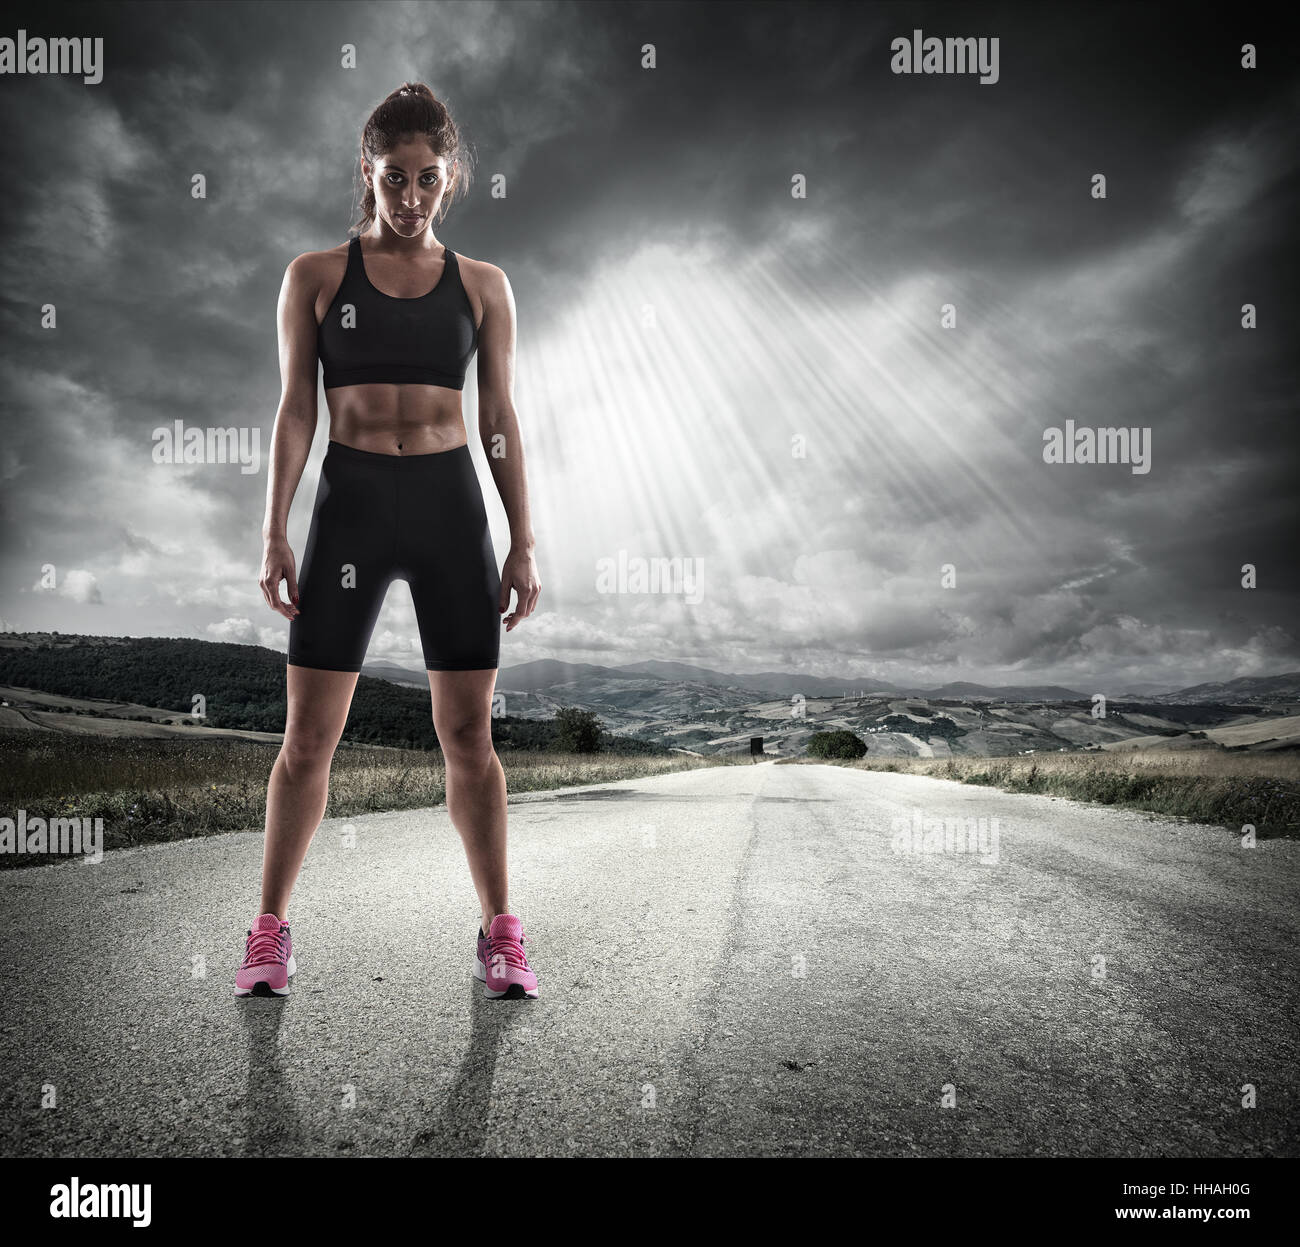 Athletic woman runner Stock Photo